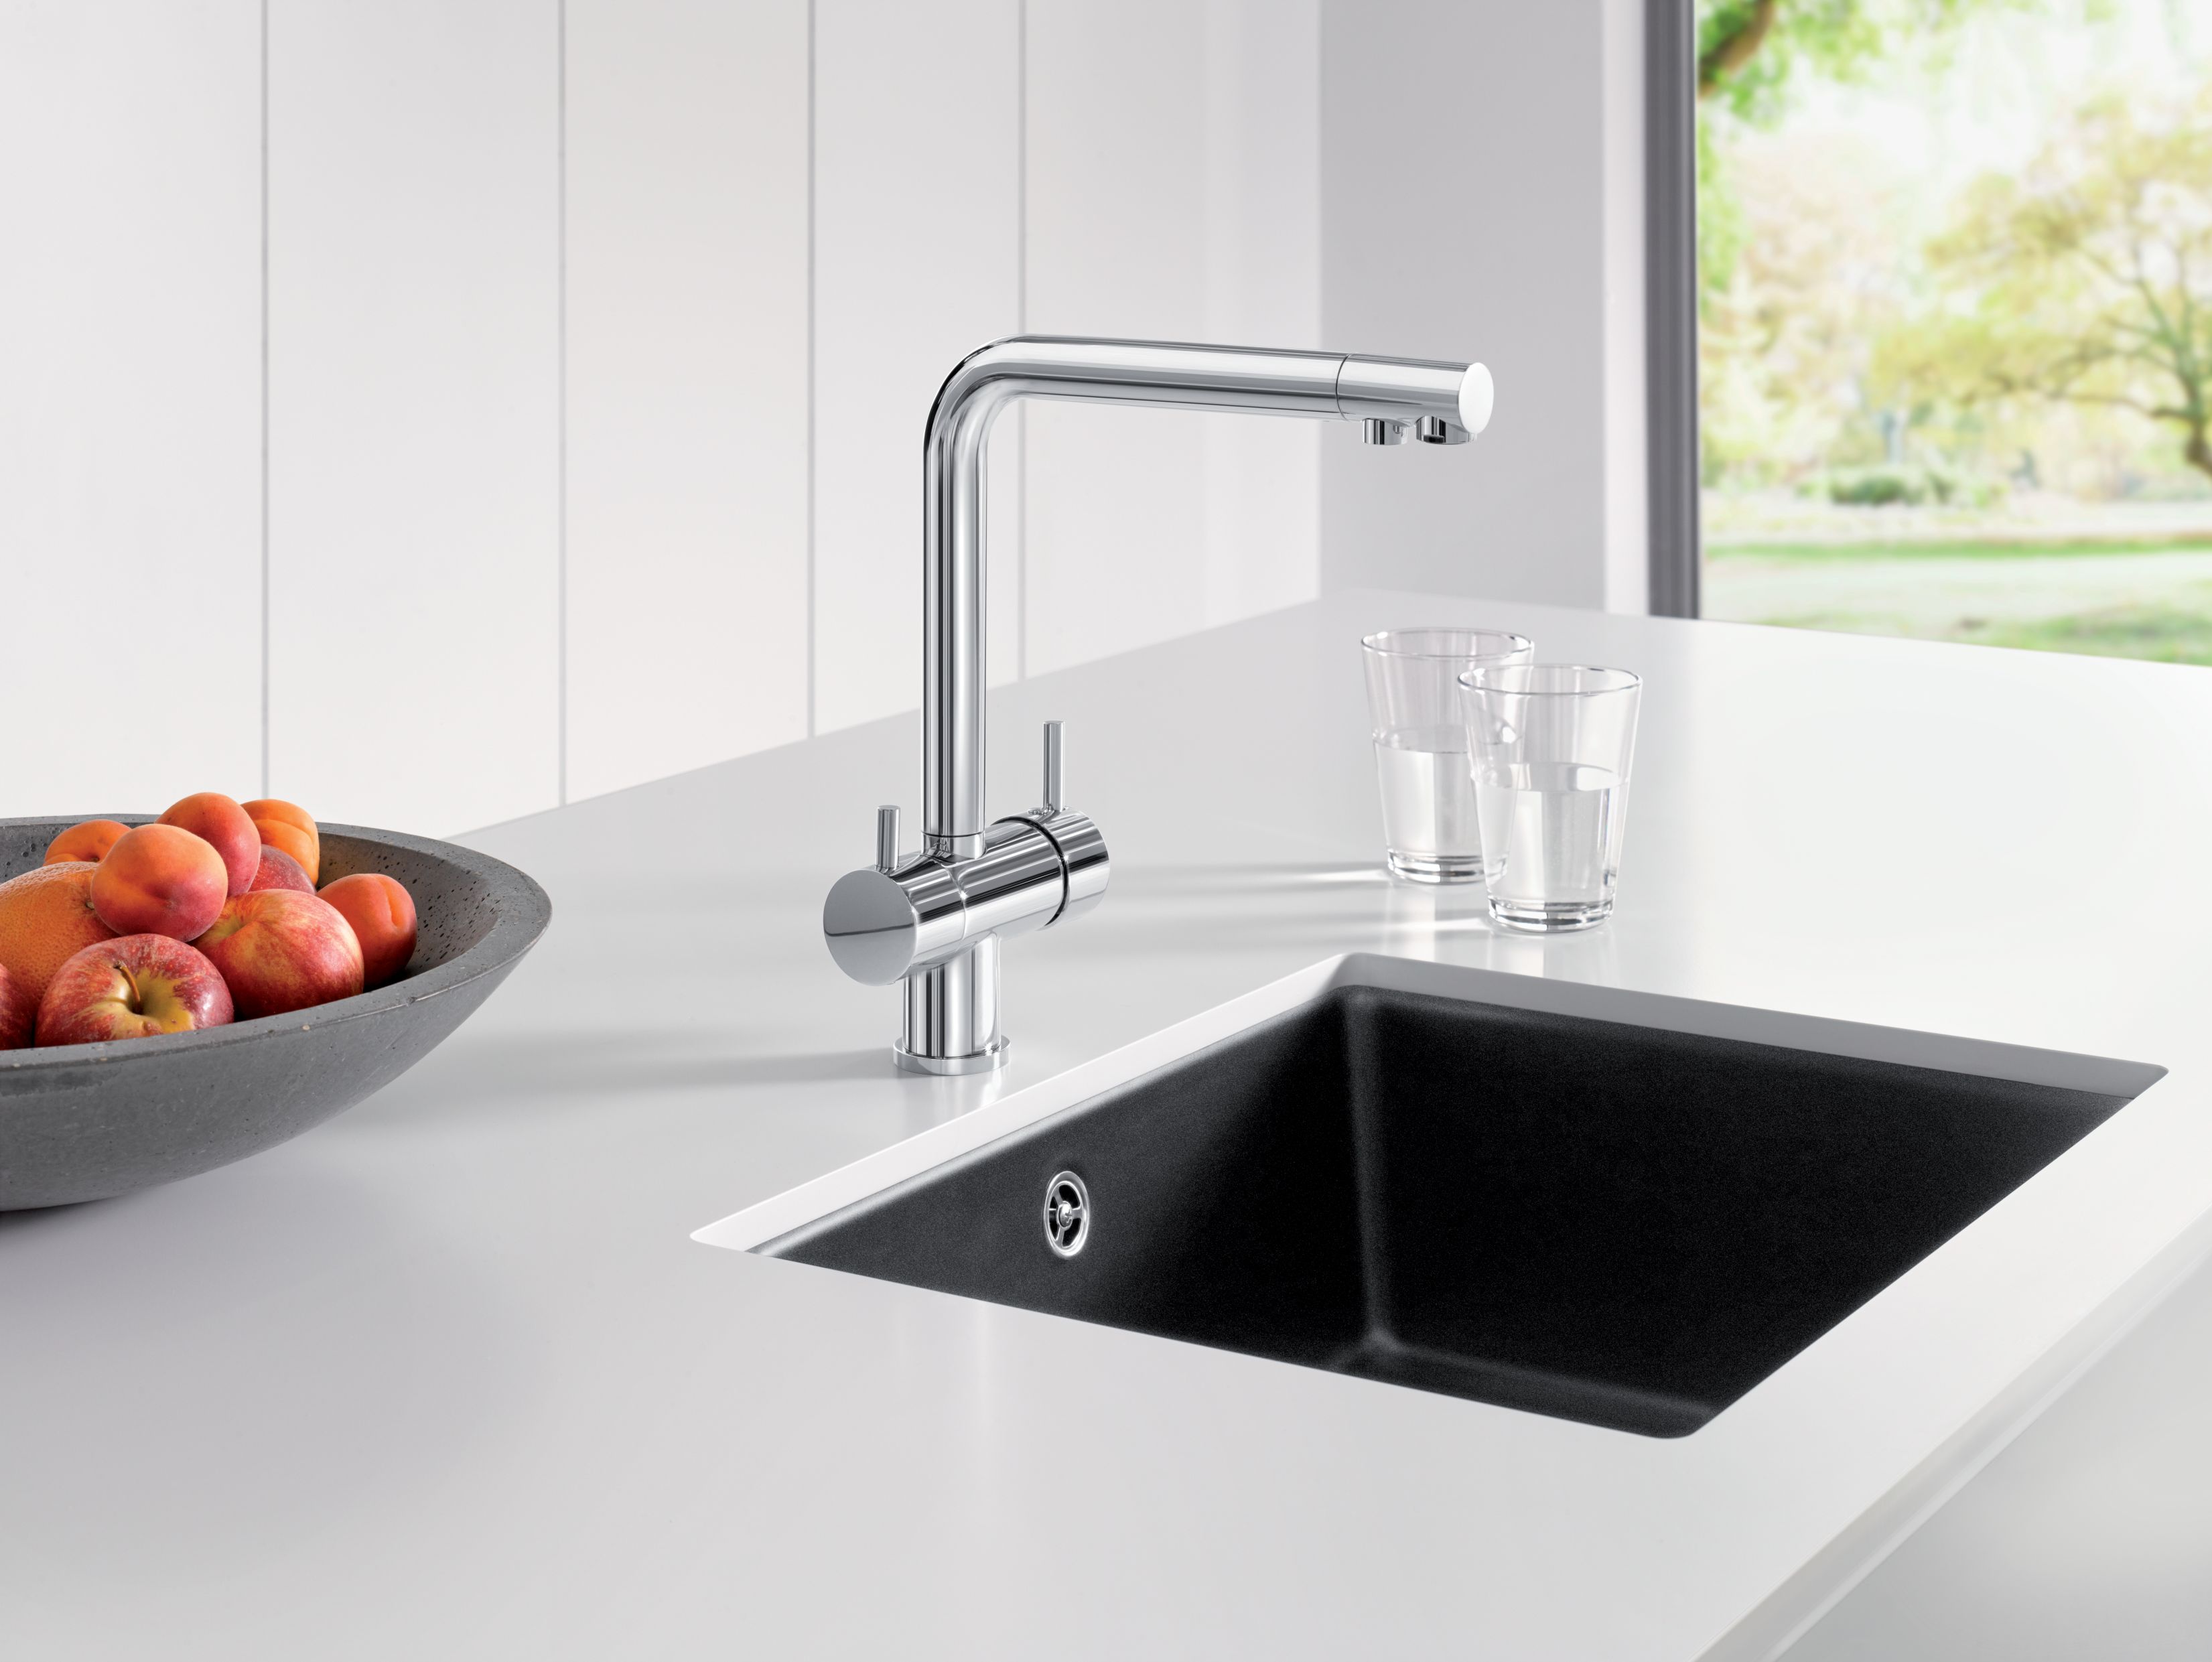 Undermount sinks can be integrated to perfection and make an attractive yet unobtrusive feature on your kitchen island